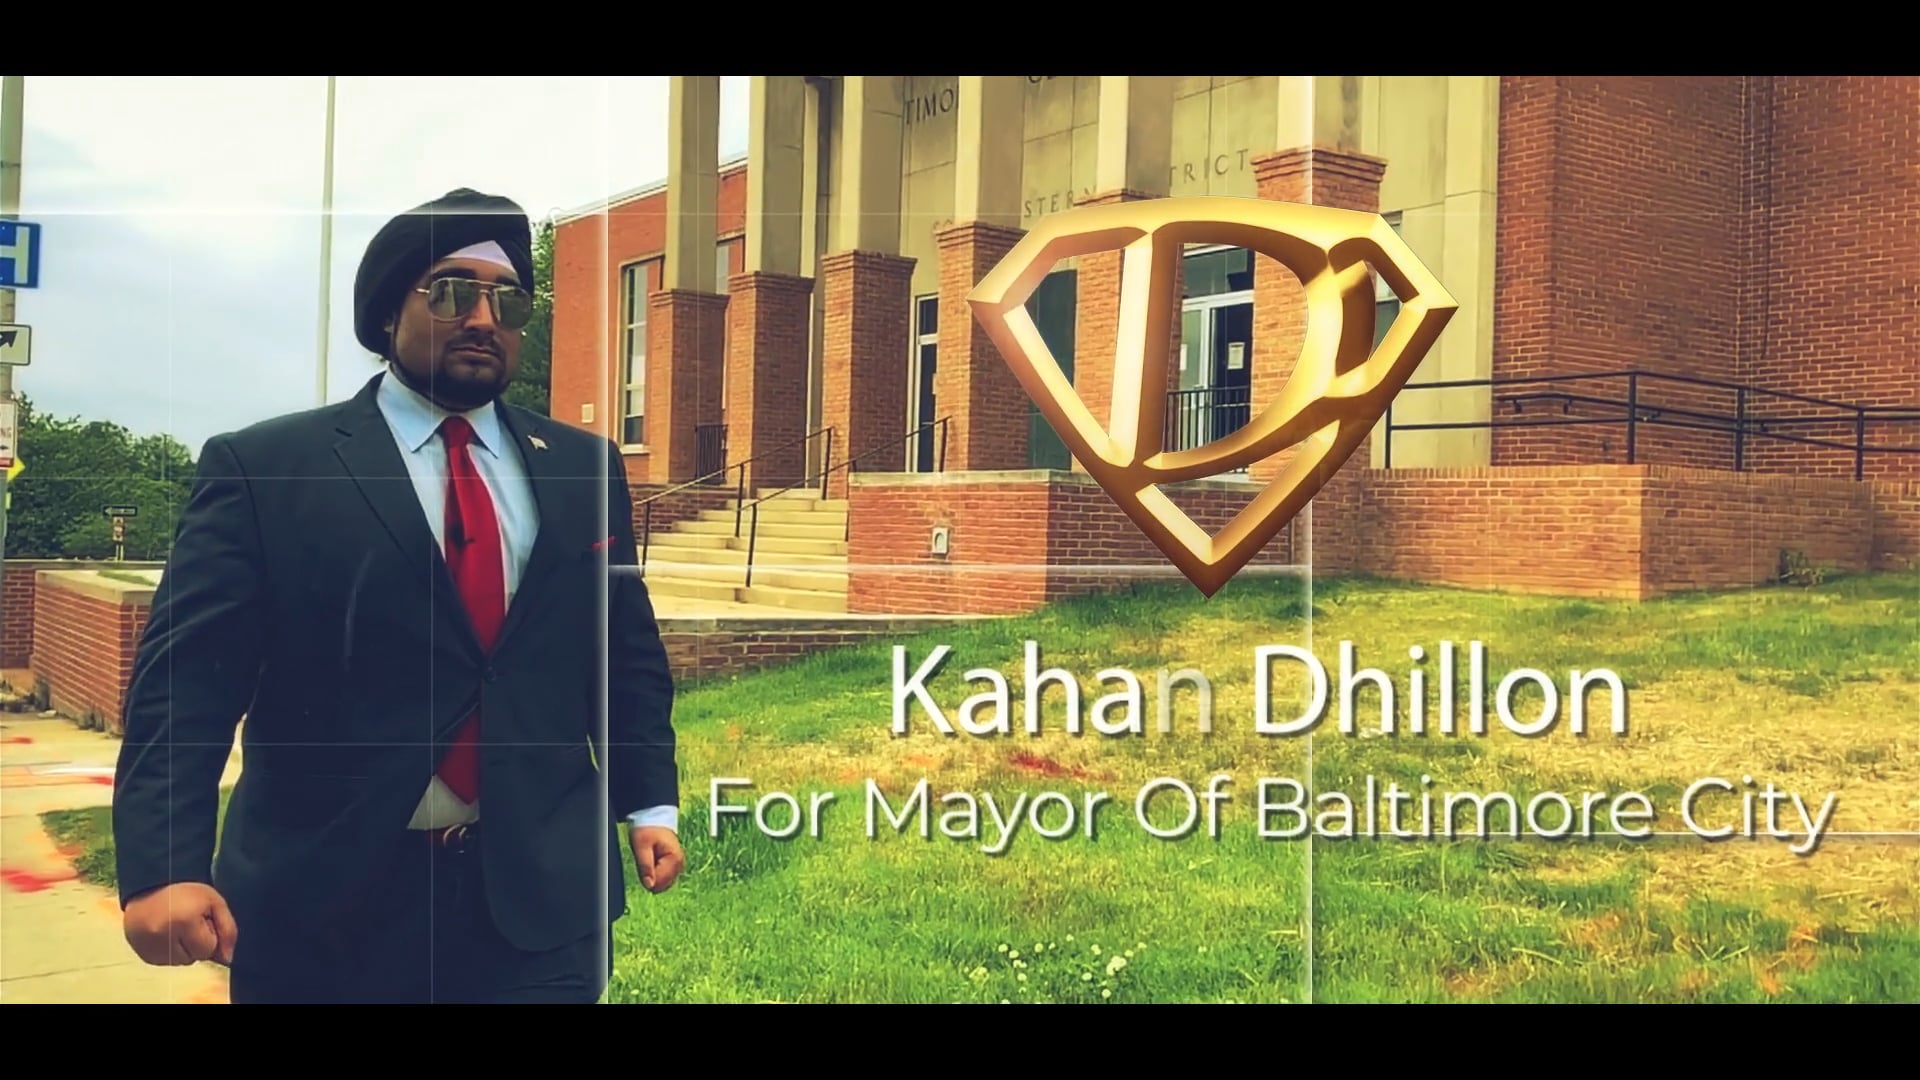 Friends Of Kahan Dhillon (Political) - Weston Trussell on Vimeo